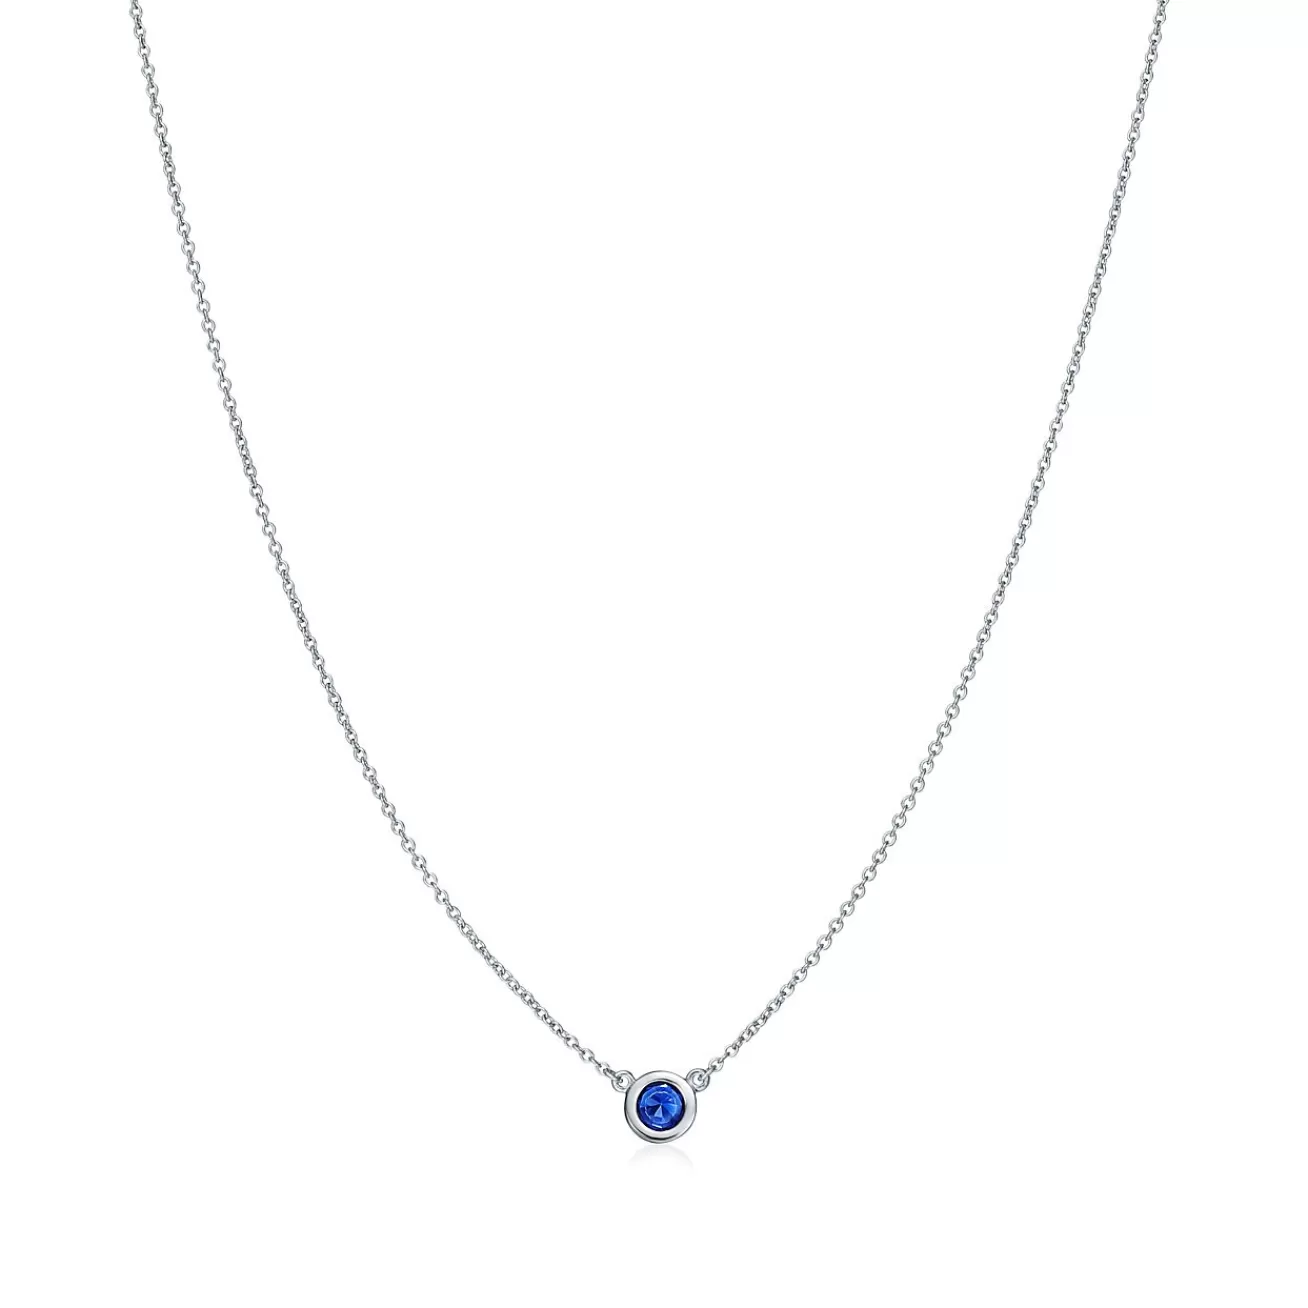 Tiffany & Co. Elsa Peretti® Color by the Yard Pendant in Platinum with a Sapphire | ^ Necklaces & Pendants | Dainty Jewelry